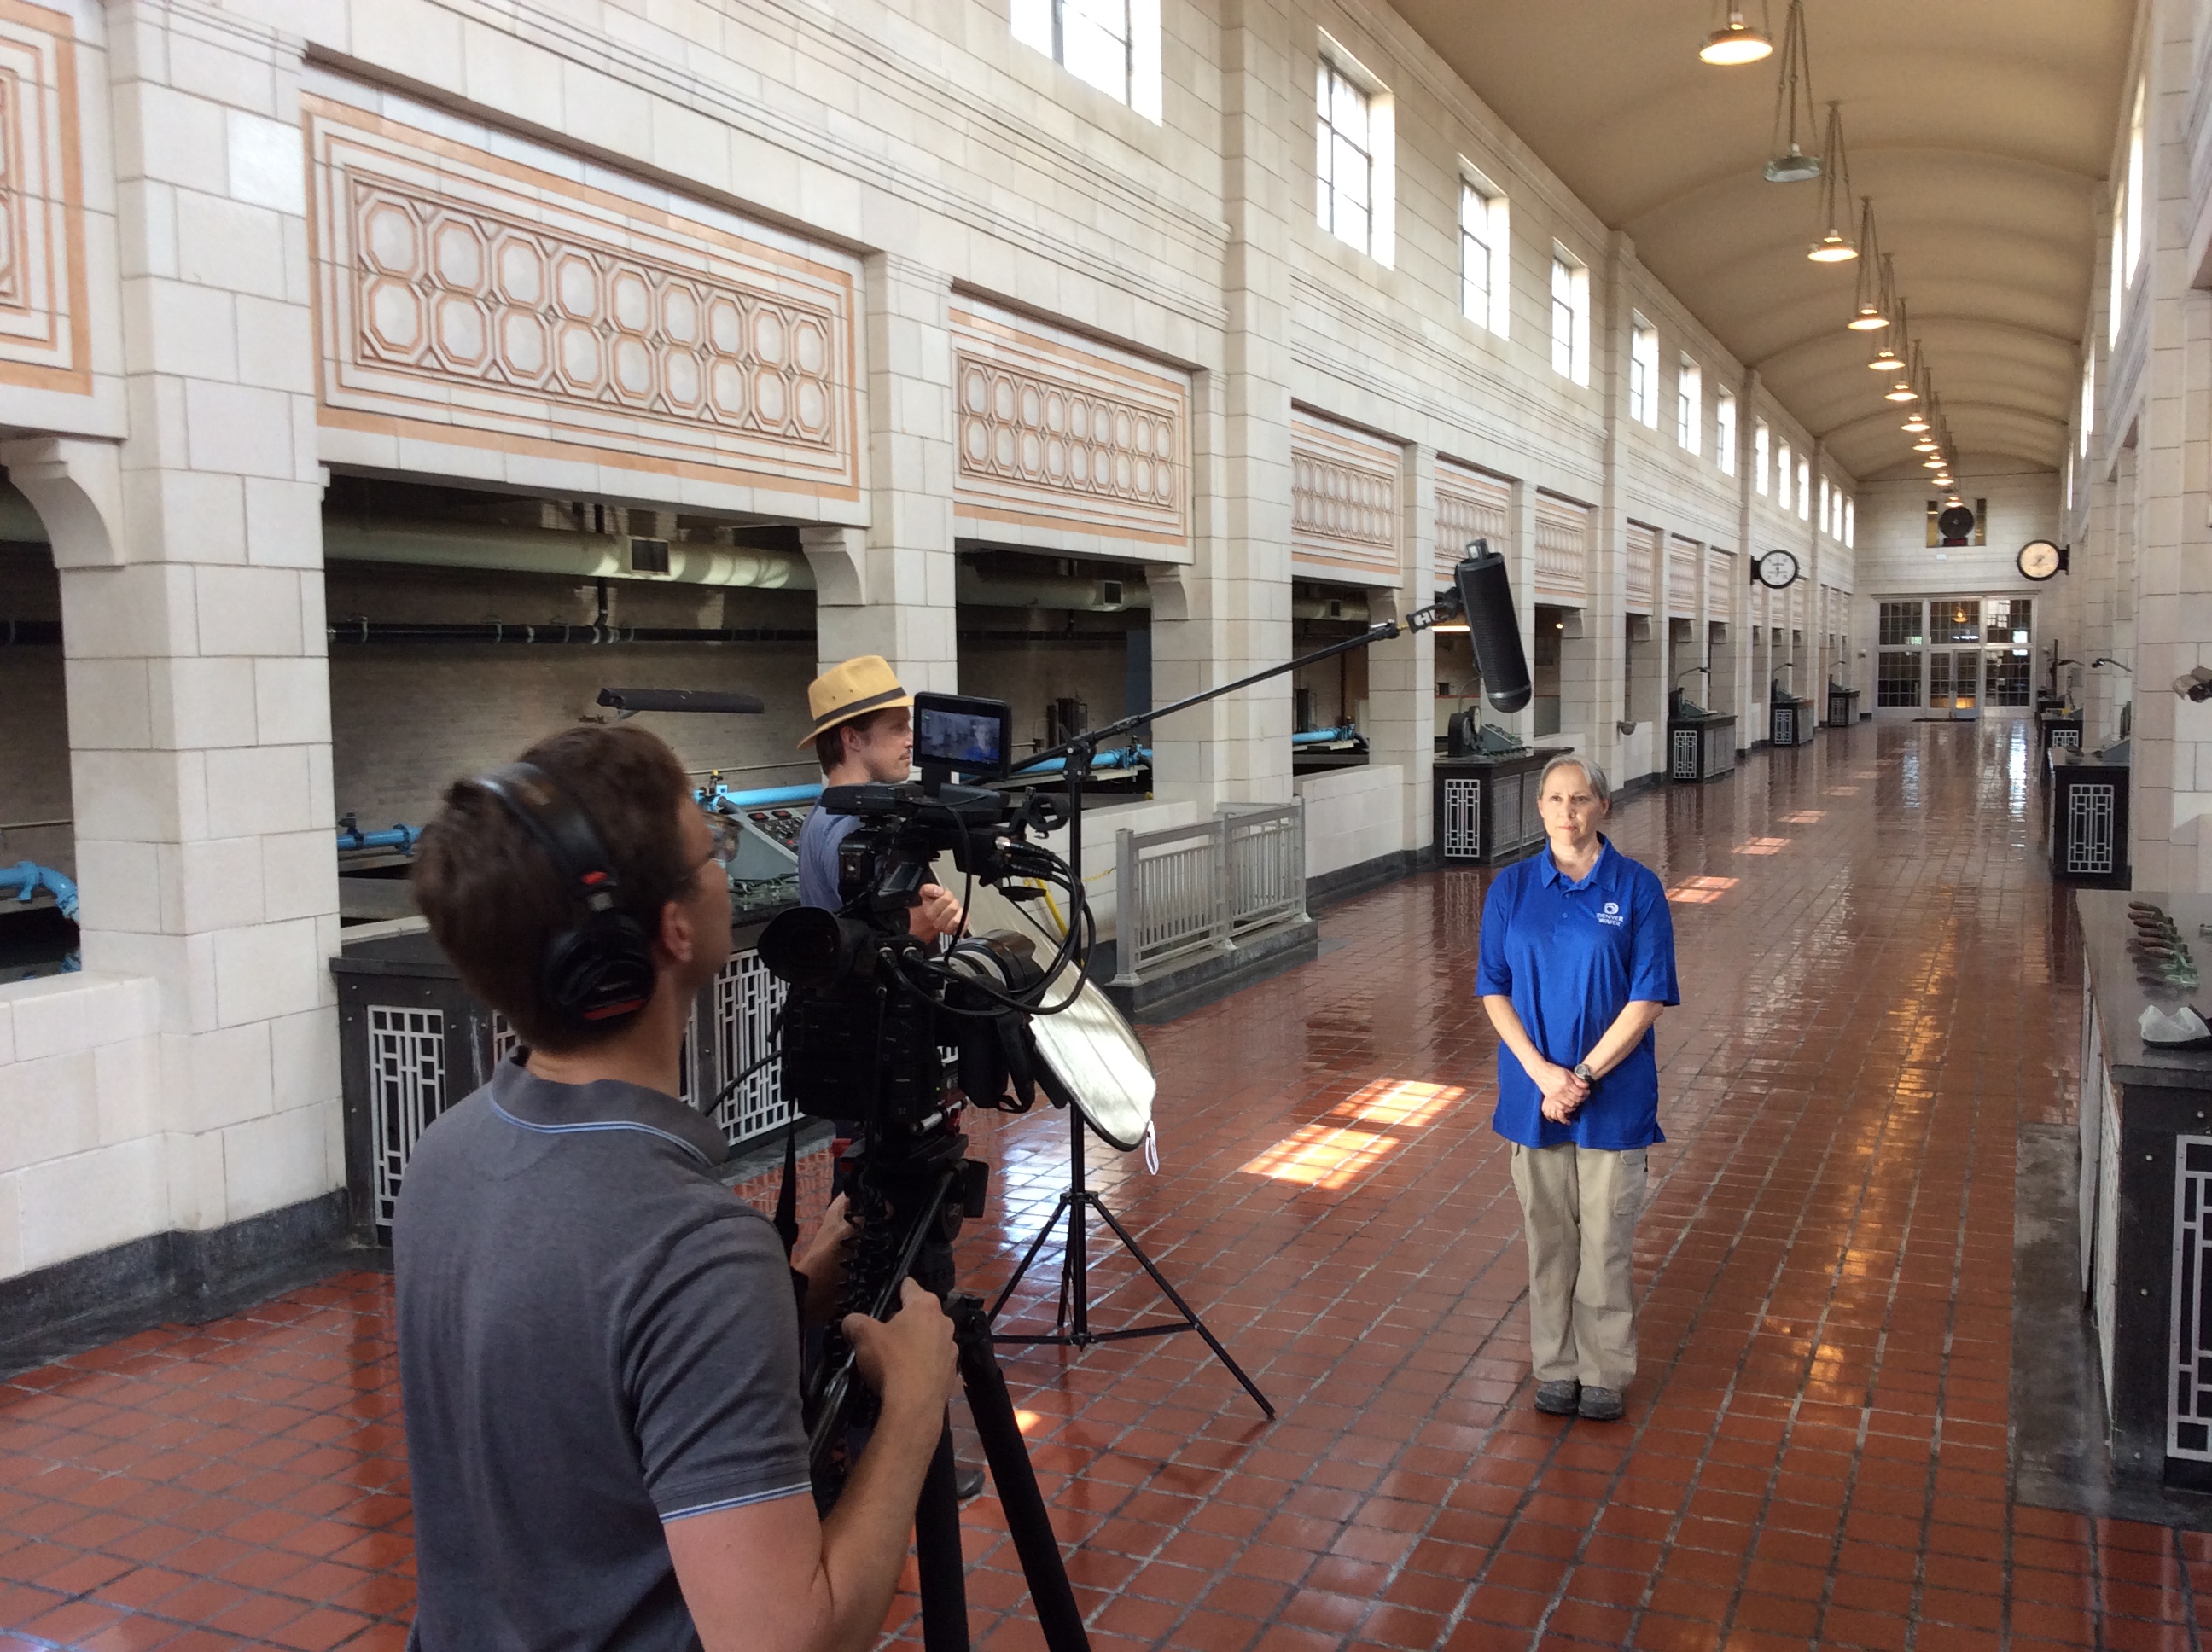 Jean Reding, water treatment lead at Moffat Treatment Plant, does an interview with Nathan Church (left) and Zach Andrews from HaveyPro Cinema in the central hall of the Moffat Treatment Plant for “Written in Water: Reflections on a Century of Service.”